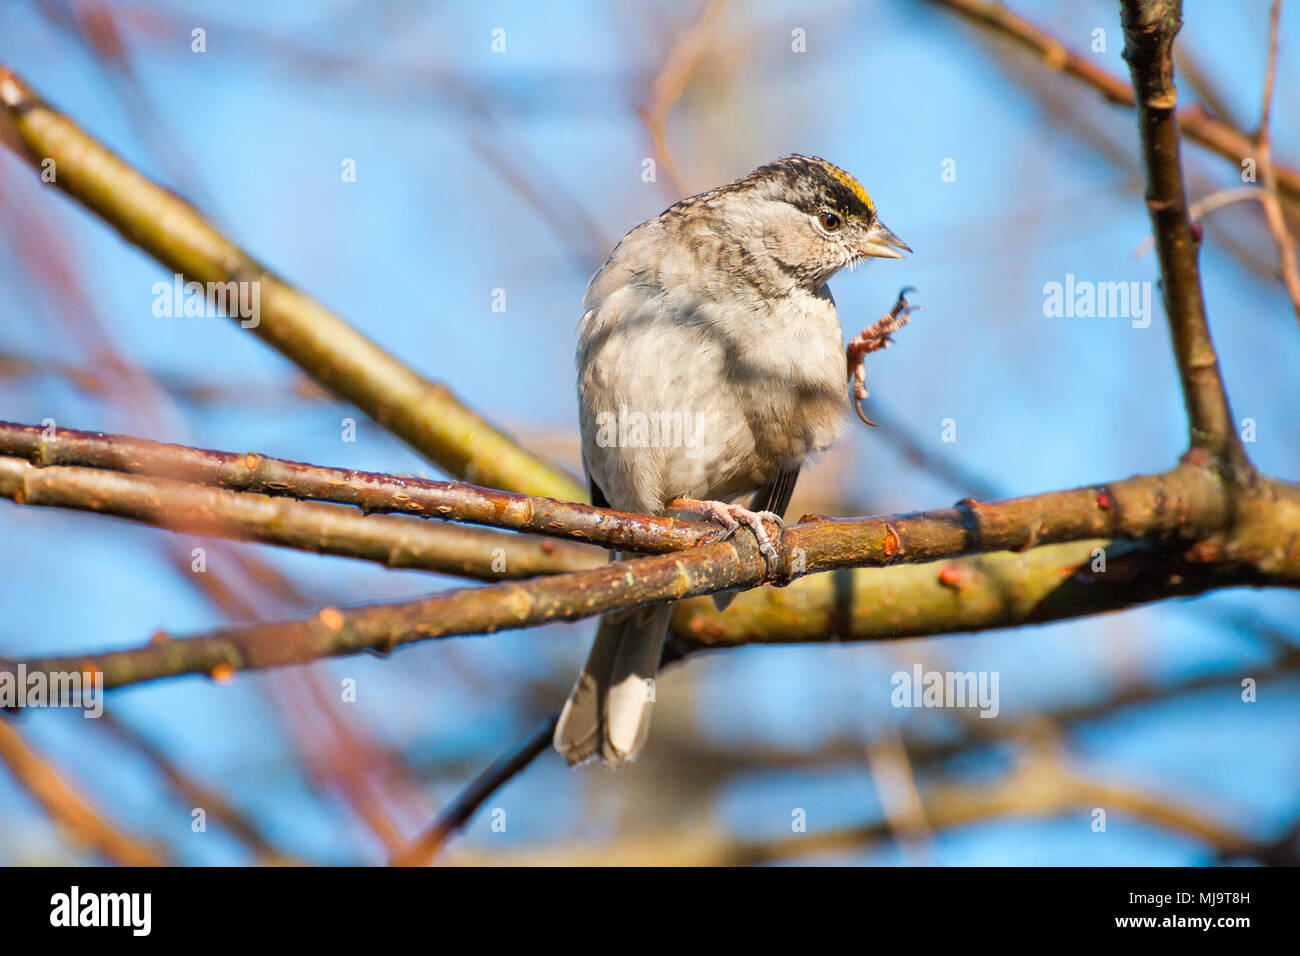 Golden-crowned sparrow (Zonotrichia atricapilla)  itching itself, British Columbia, Canada Stock Photo